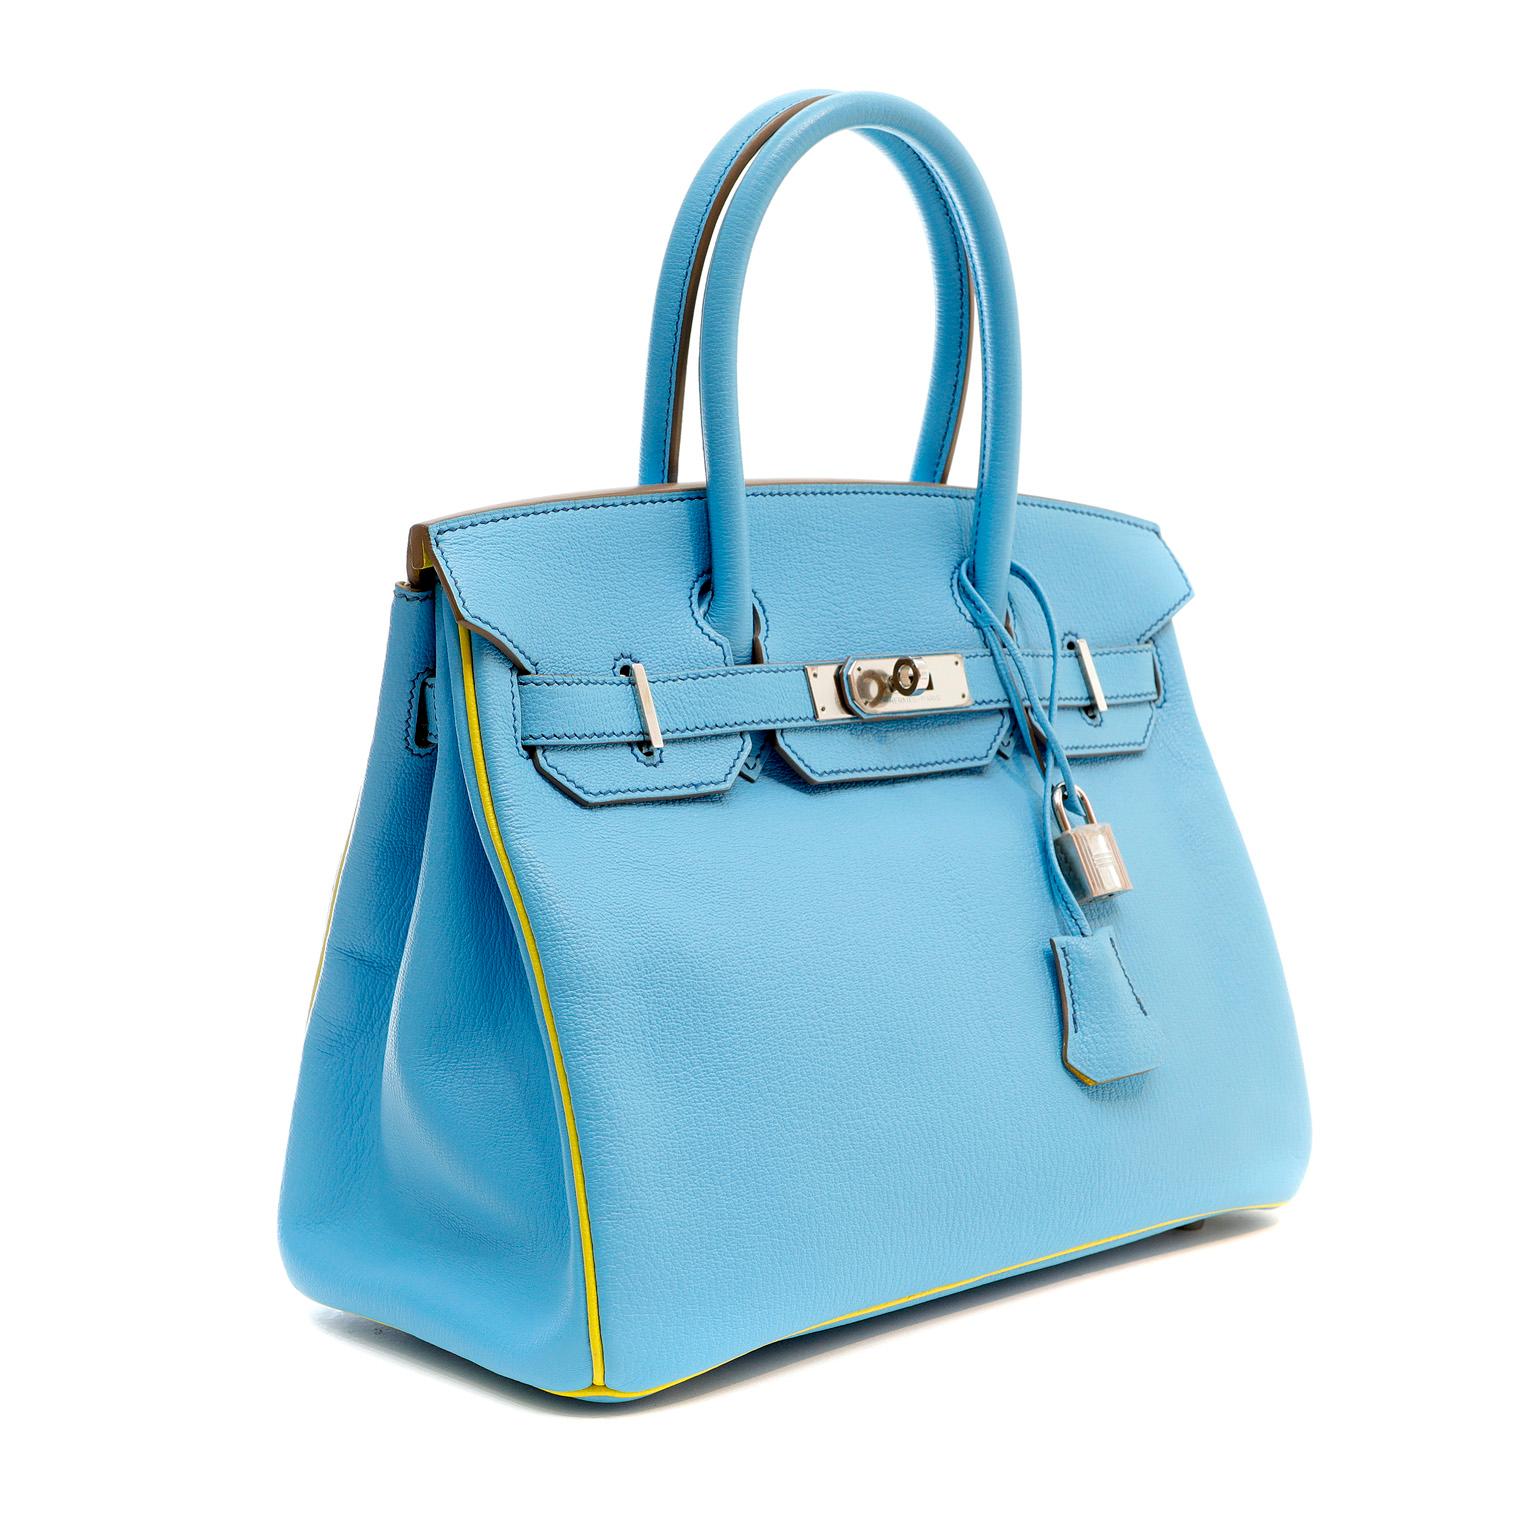 This authentic Hermès Turquoise and Lime Green Horseshoe Chevre 30 cm Birkin is in pristine unworn condition.  Specially ordered, Horseshoe Birkins are extremely rare and only offered to select clientele.    

Vibrant Turquoise chevre (goat hide) is